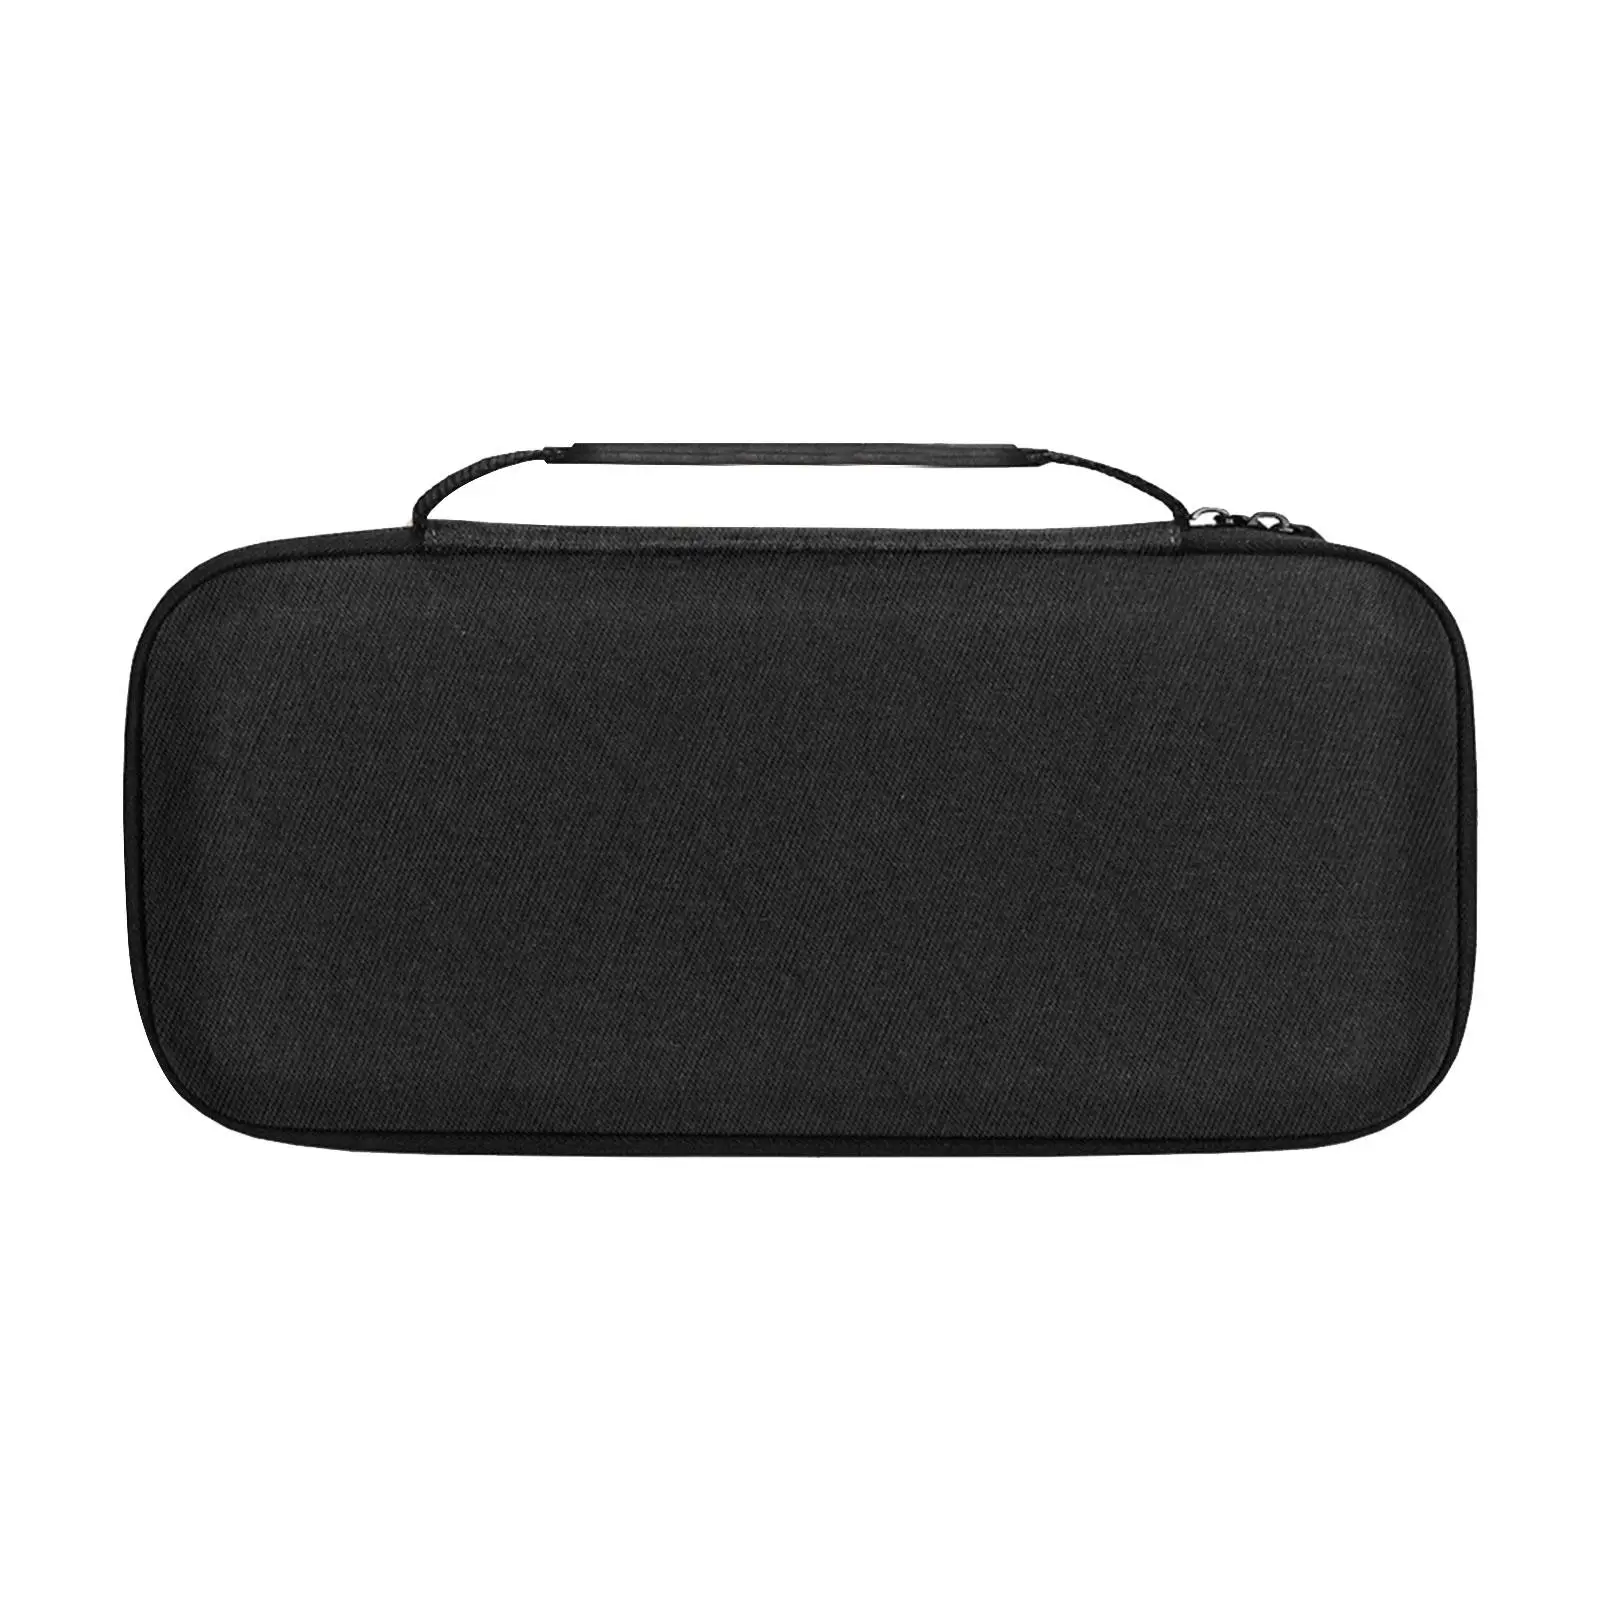 Handheld Game Console Carrying Case Game Machine Accessories Storage Bag Game Player Box EVA Easy to Carry Shockproof Hard Shell